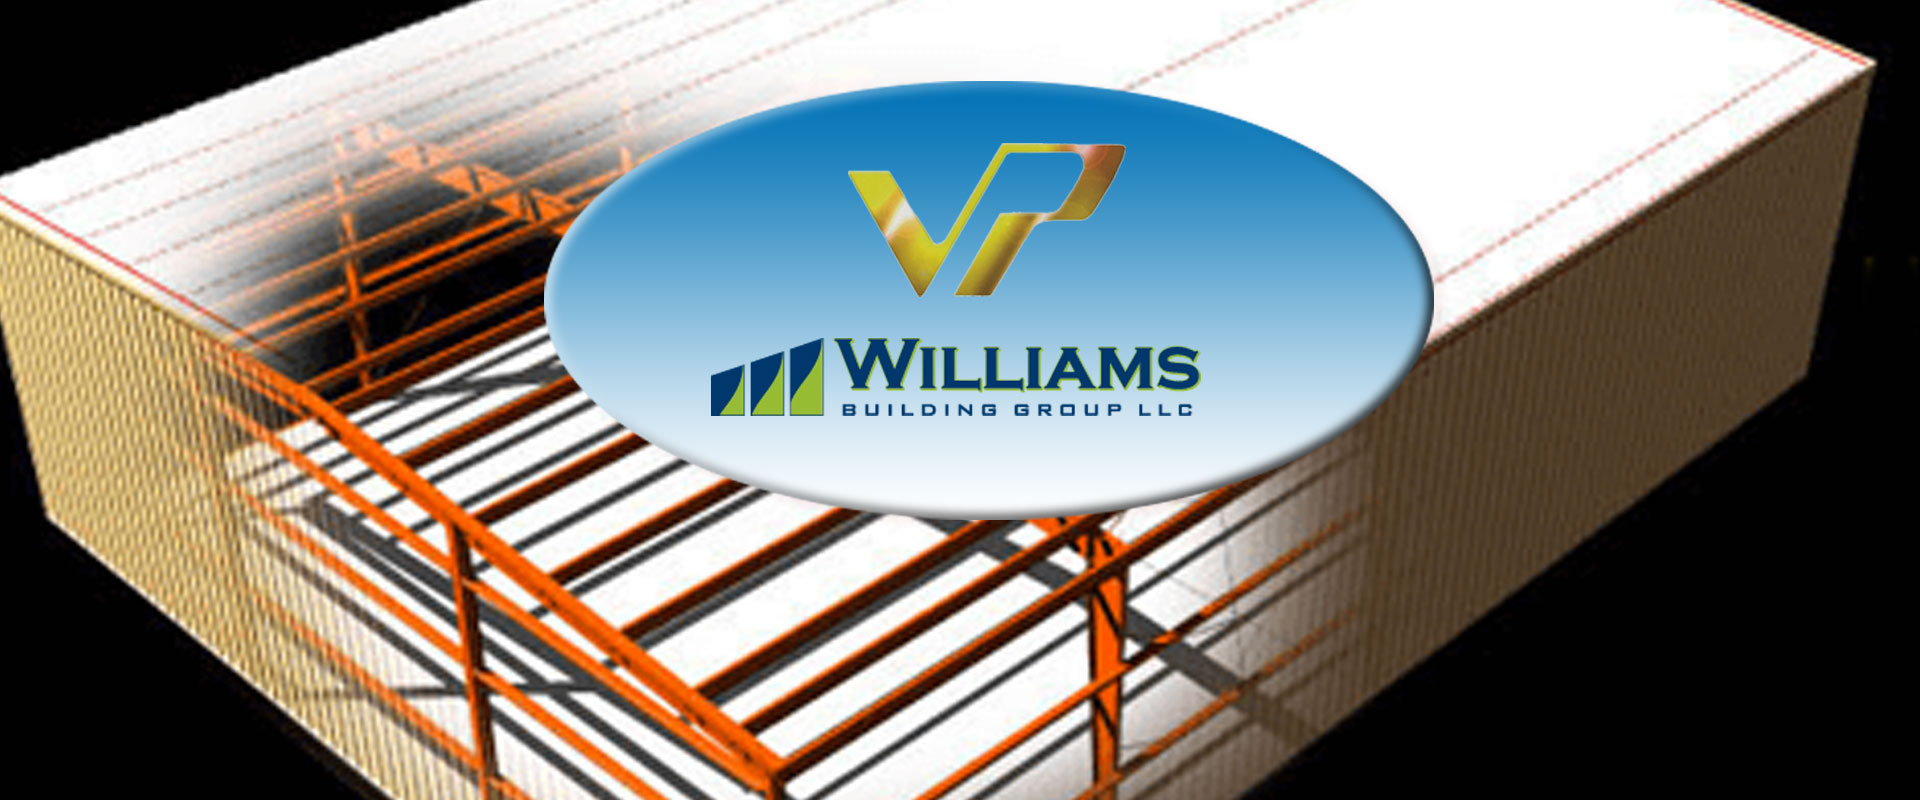 Williams Building Group